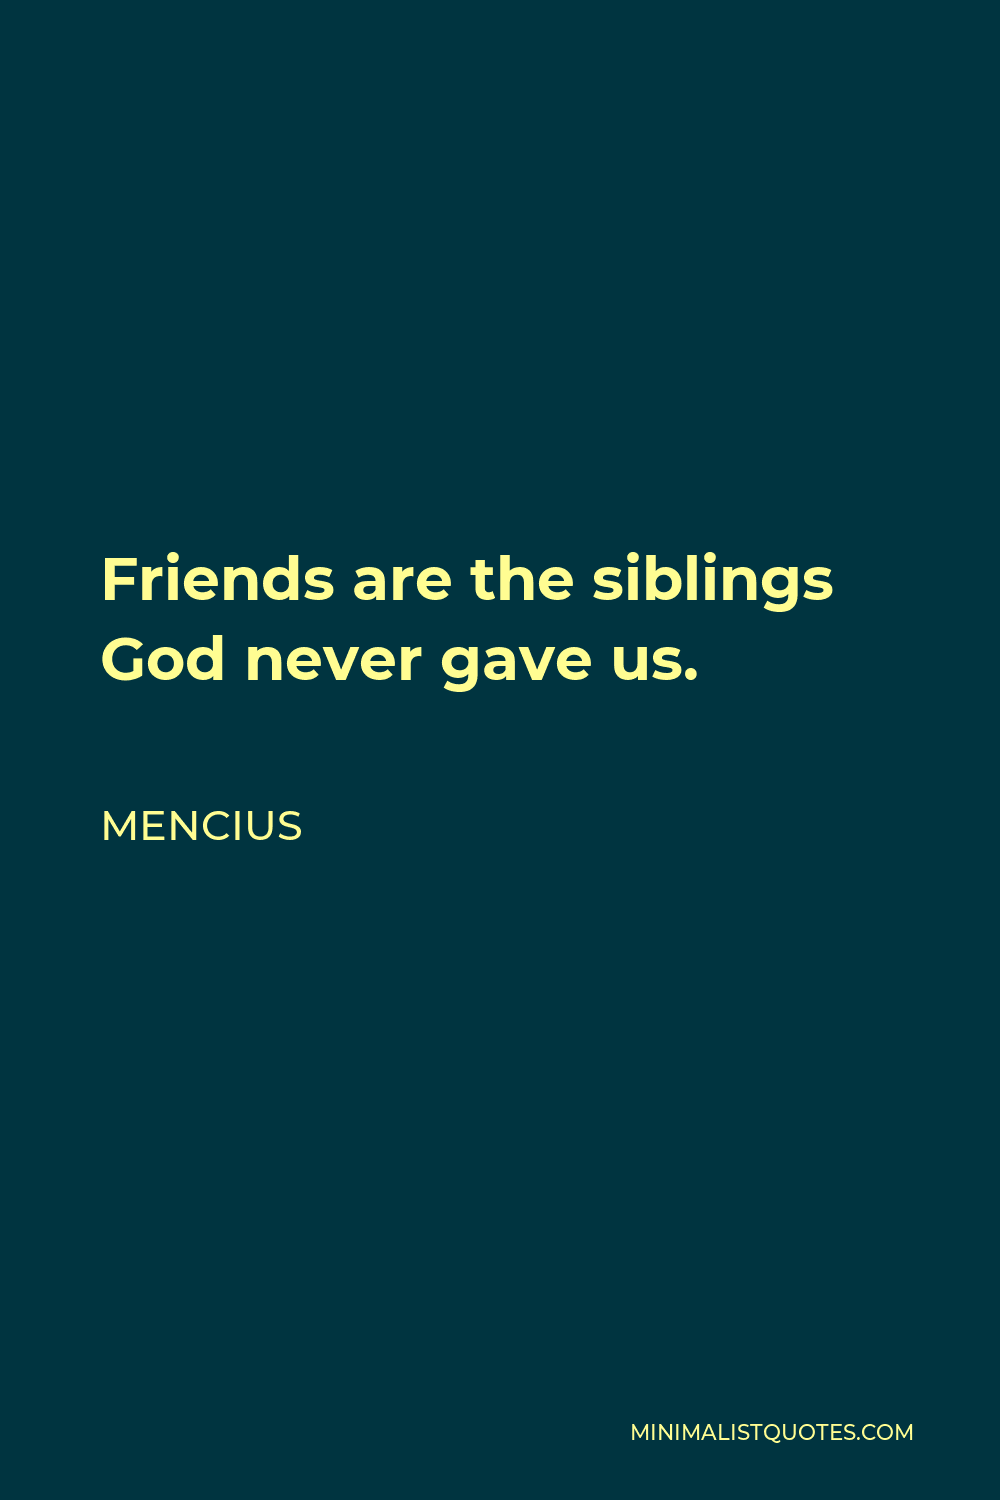 Mencius Quote - Friends are the siblings God never gave us.